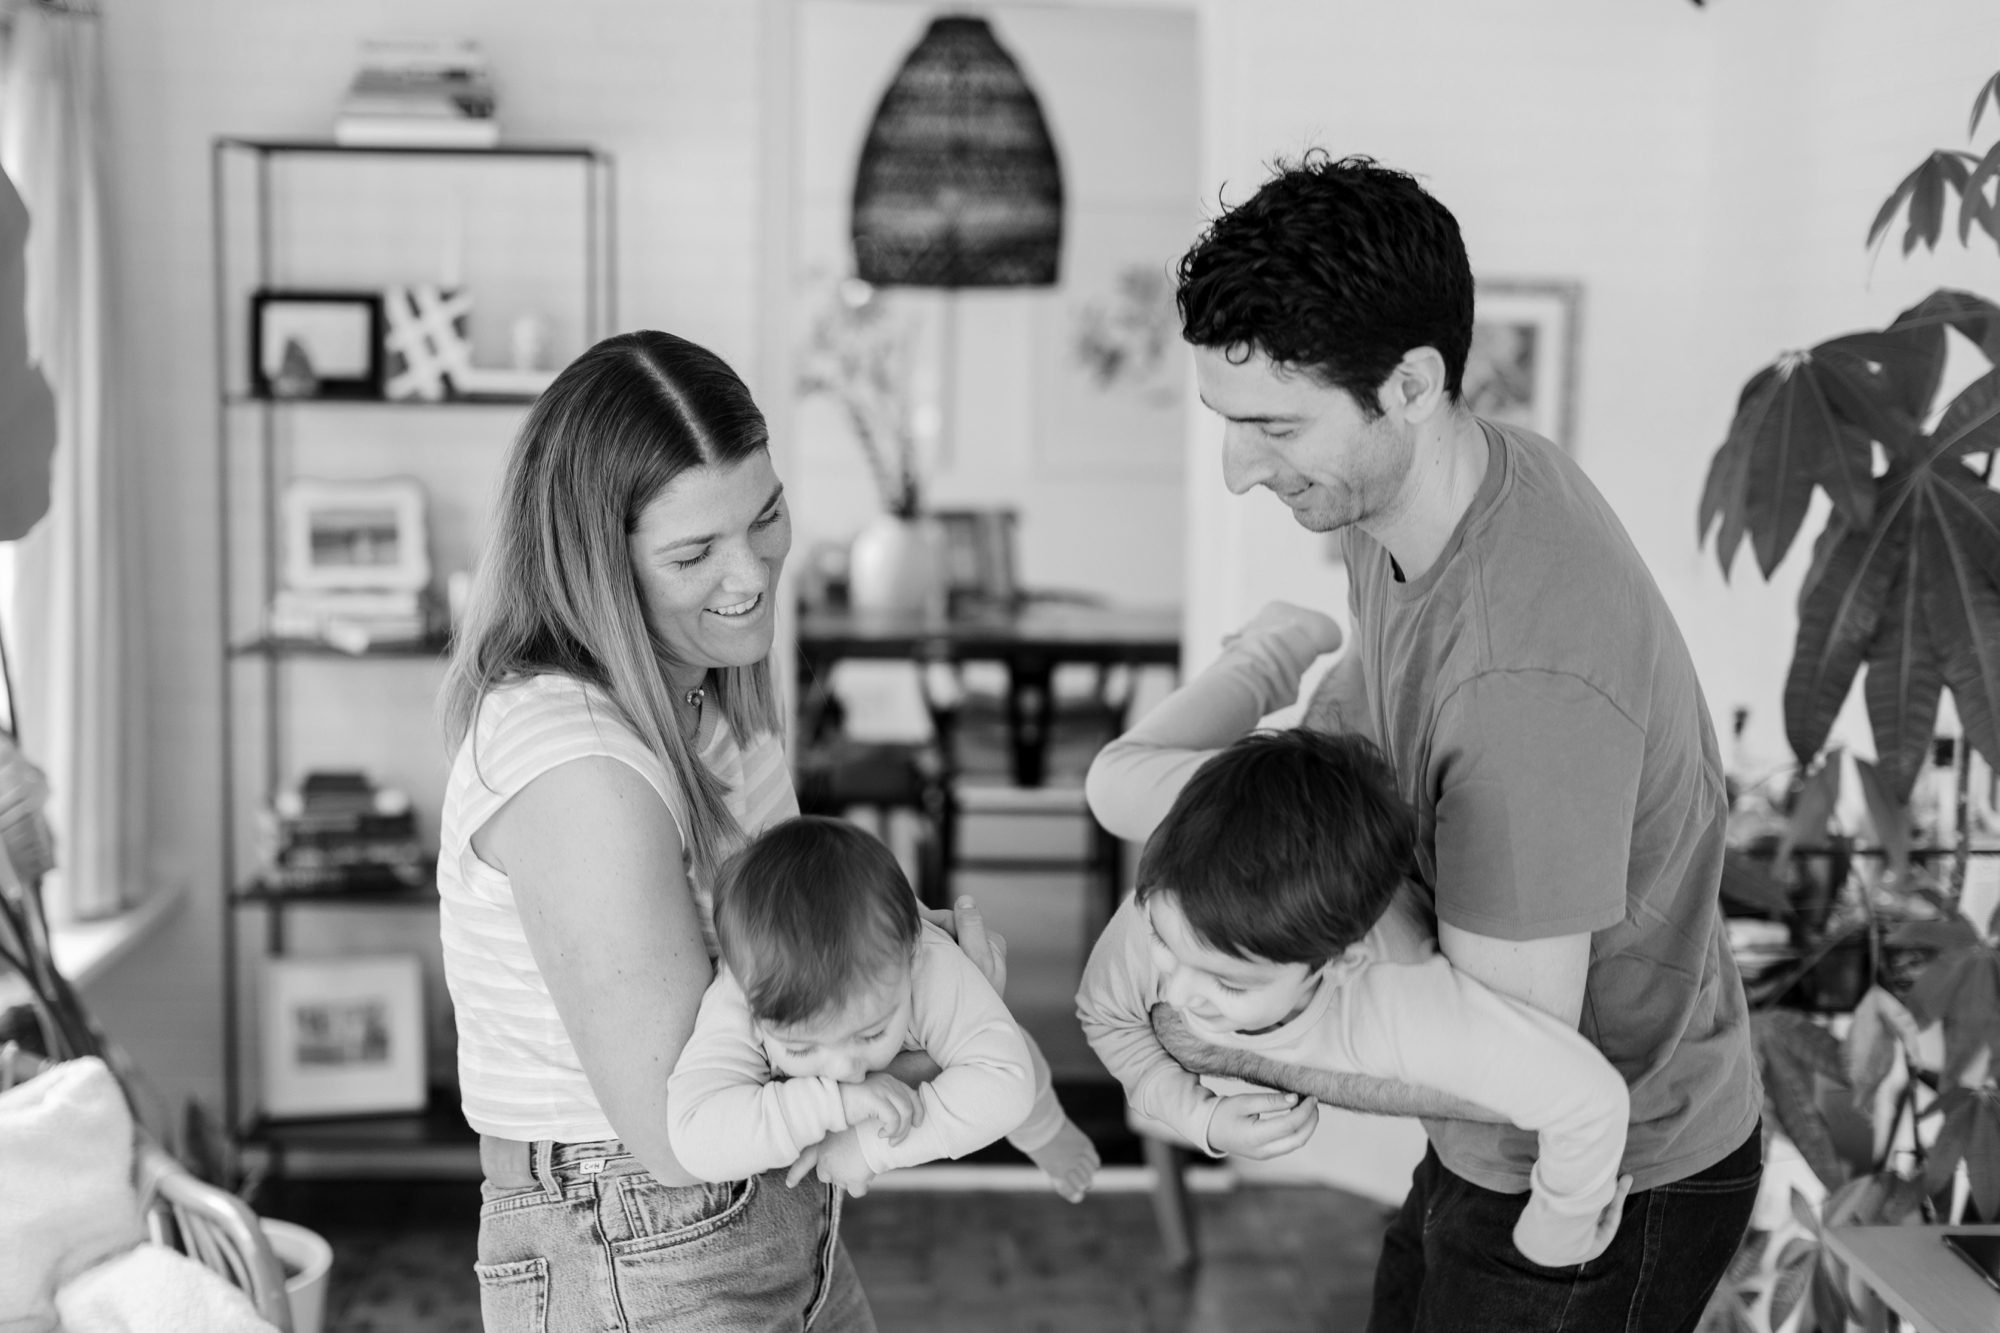 the mom and dad each held a child during the Chicago family photo session